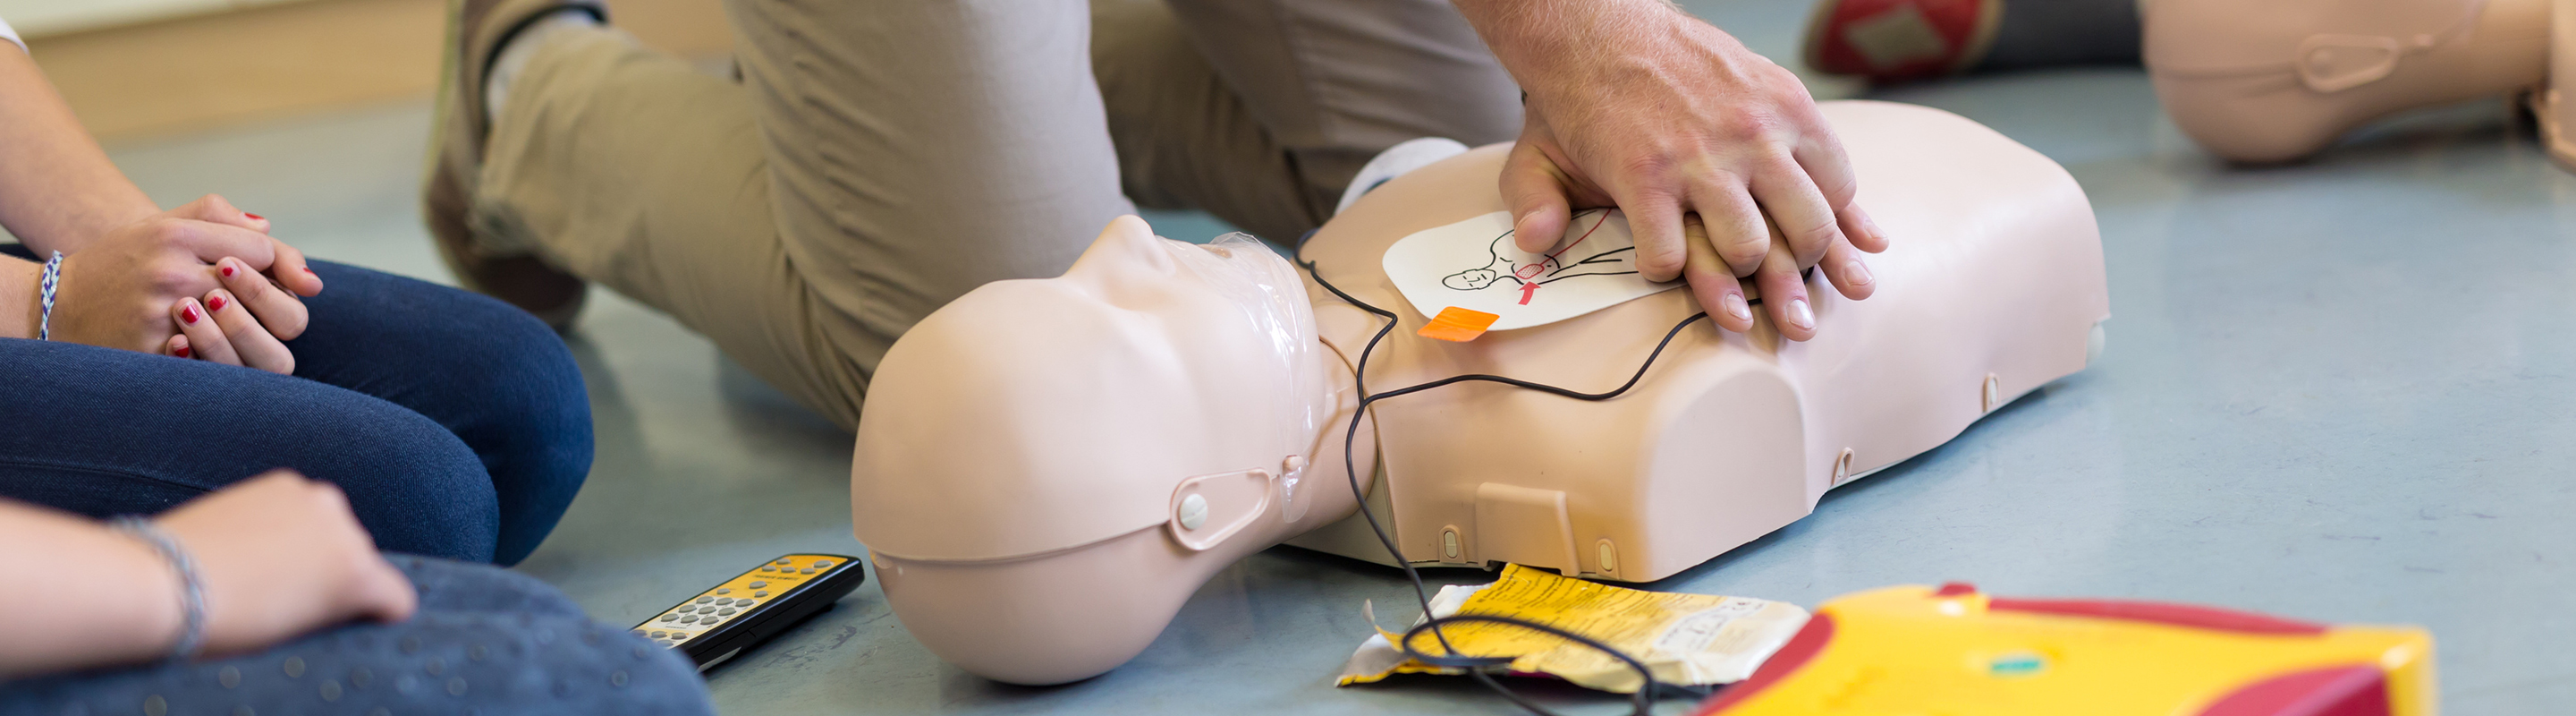 a man practicing CPR life saving skills on a dummy